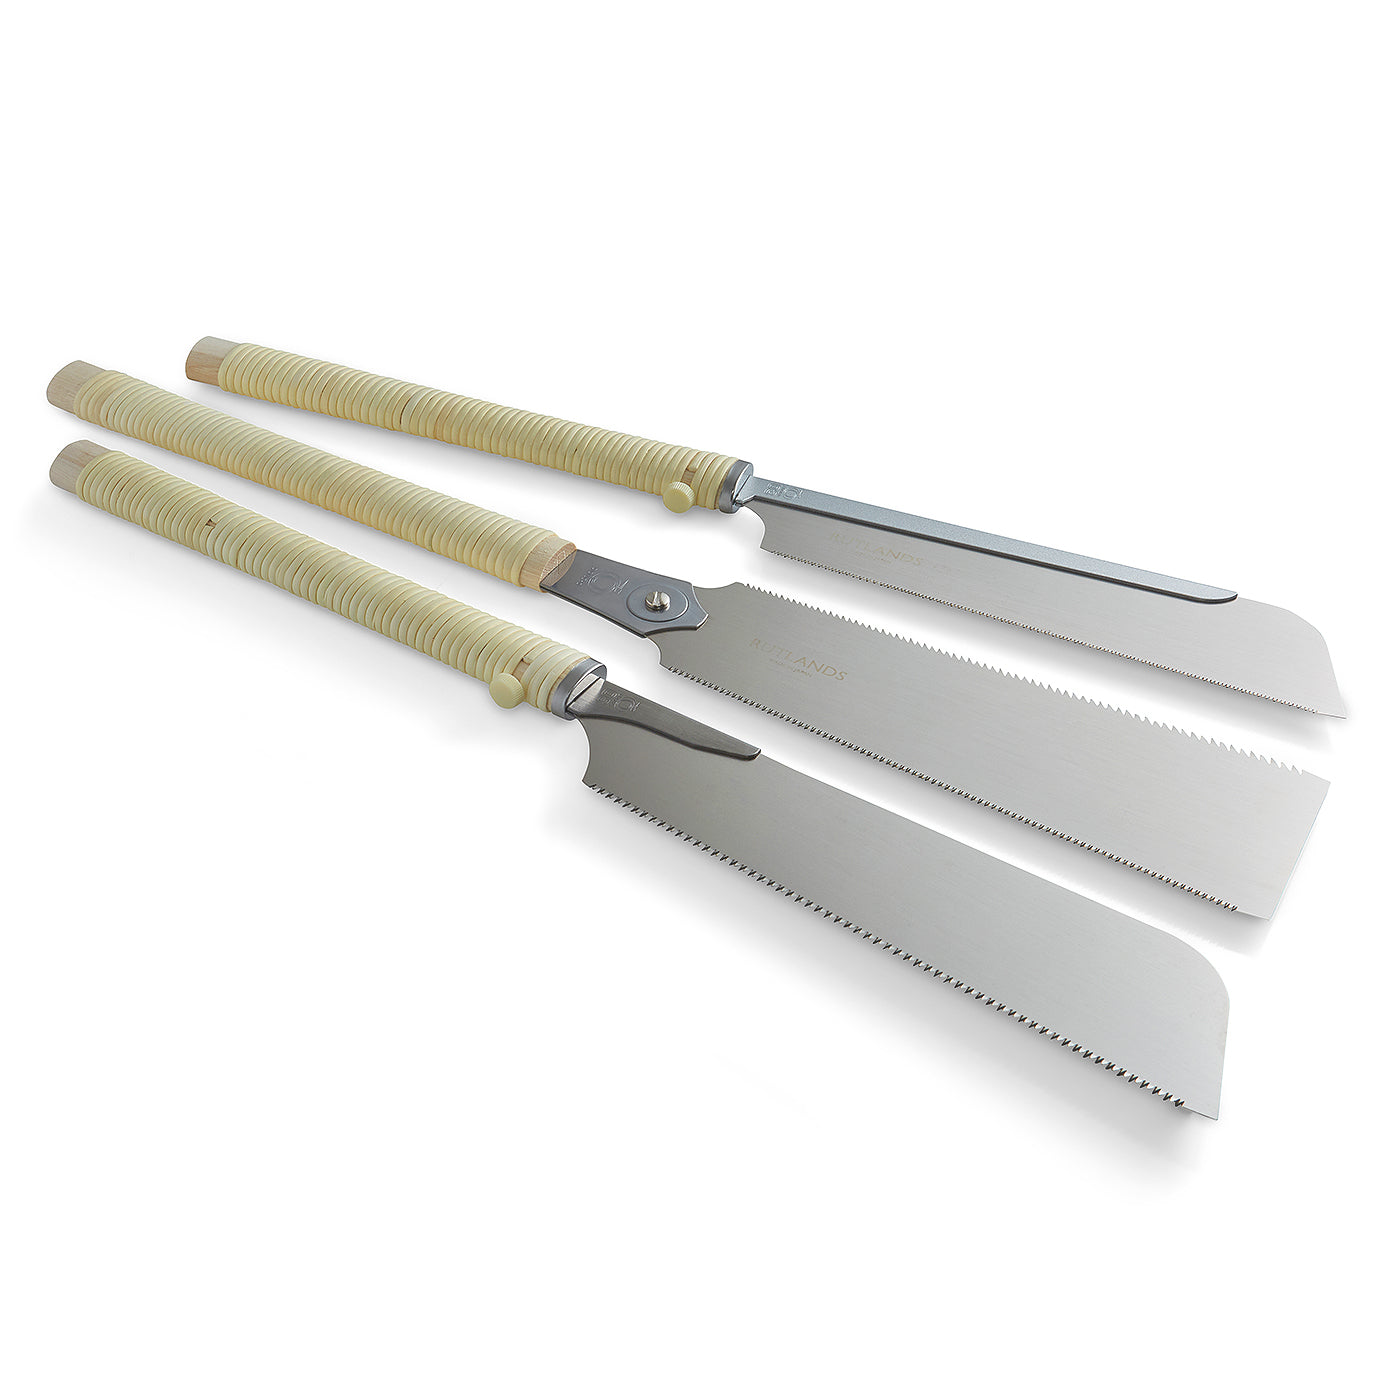 Japanese Saws - 240mm - Rattan - Set of 3 with Roll